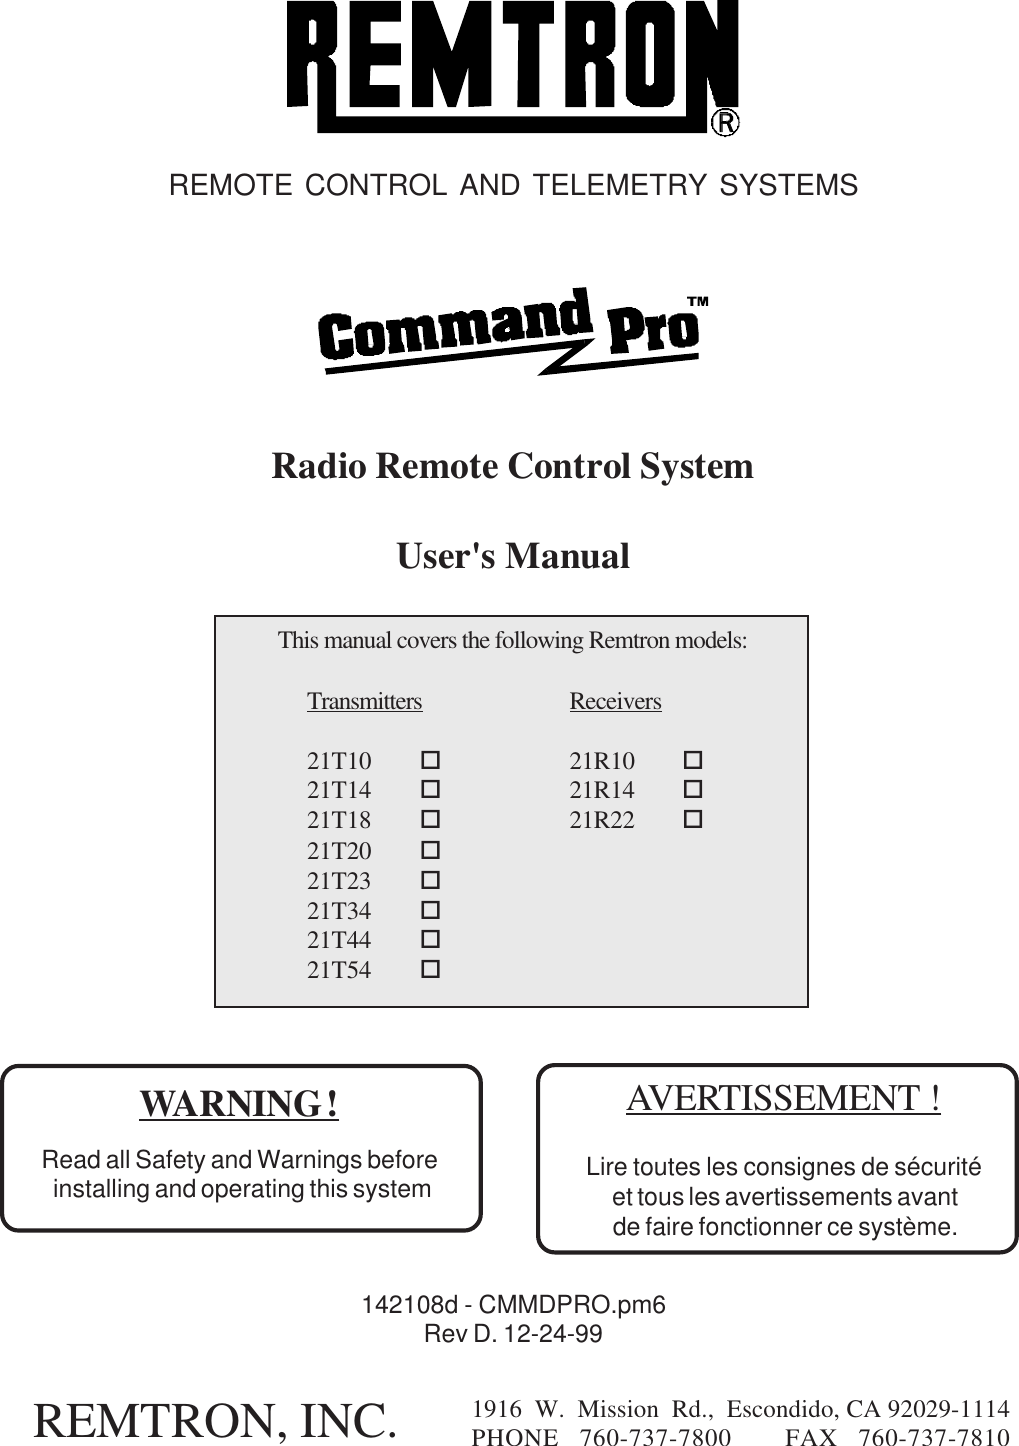 REMOTE CONTROL AND TELEMETRY SYSTEMSRead all Safety and Warnings before installing and operating this systemWARNING !142108d - CMMDPRO.pm6Rev D. 12-24-99REMTRON, INC. 1916 W. Mission Rd., Escondido, CA 92029-1114PHONE  760-737-7800    FAX  760-737-7810Radio Remote Control SystemUser&apos;s ManualThis manual covers the following Remtron models:Transmitters Receivers21T10 o21R10 o21T14 o21R14 o21T18 o21R22 o21T20 o21T23 o21T34 o21T44 o21T54 oAVERTISSEMENT !Lire toutes les consignes de sécurité et tous les avertissements avant de faire fonctionner ce système.